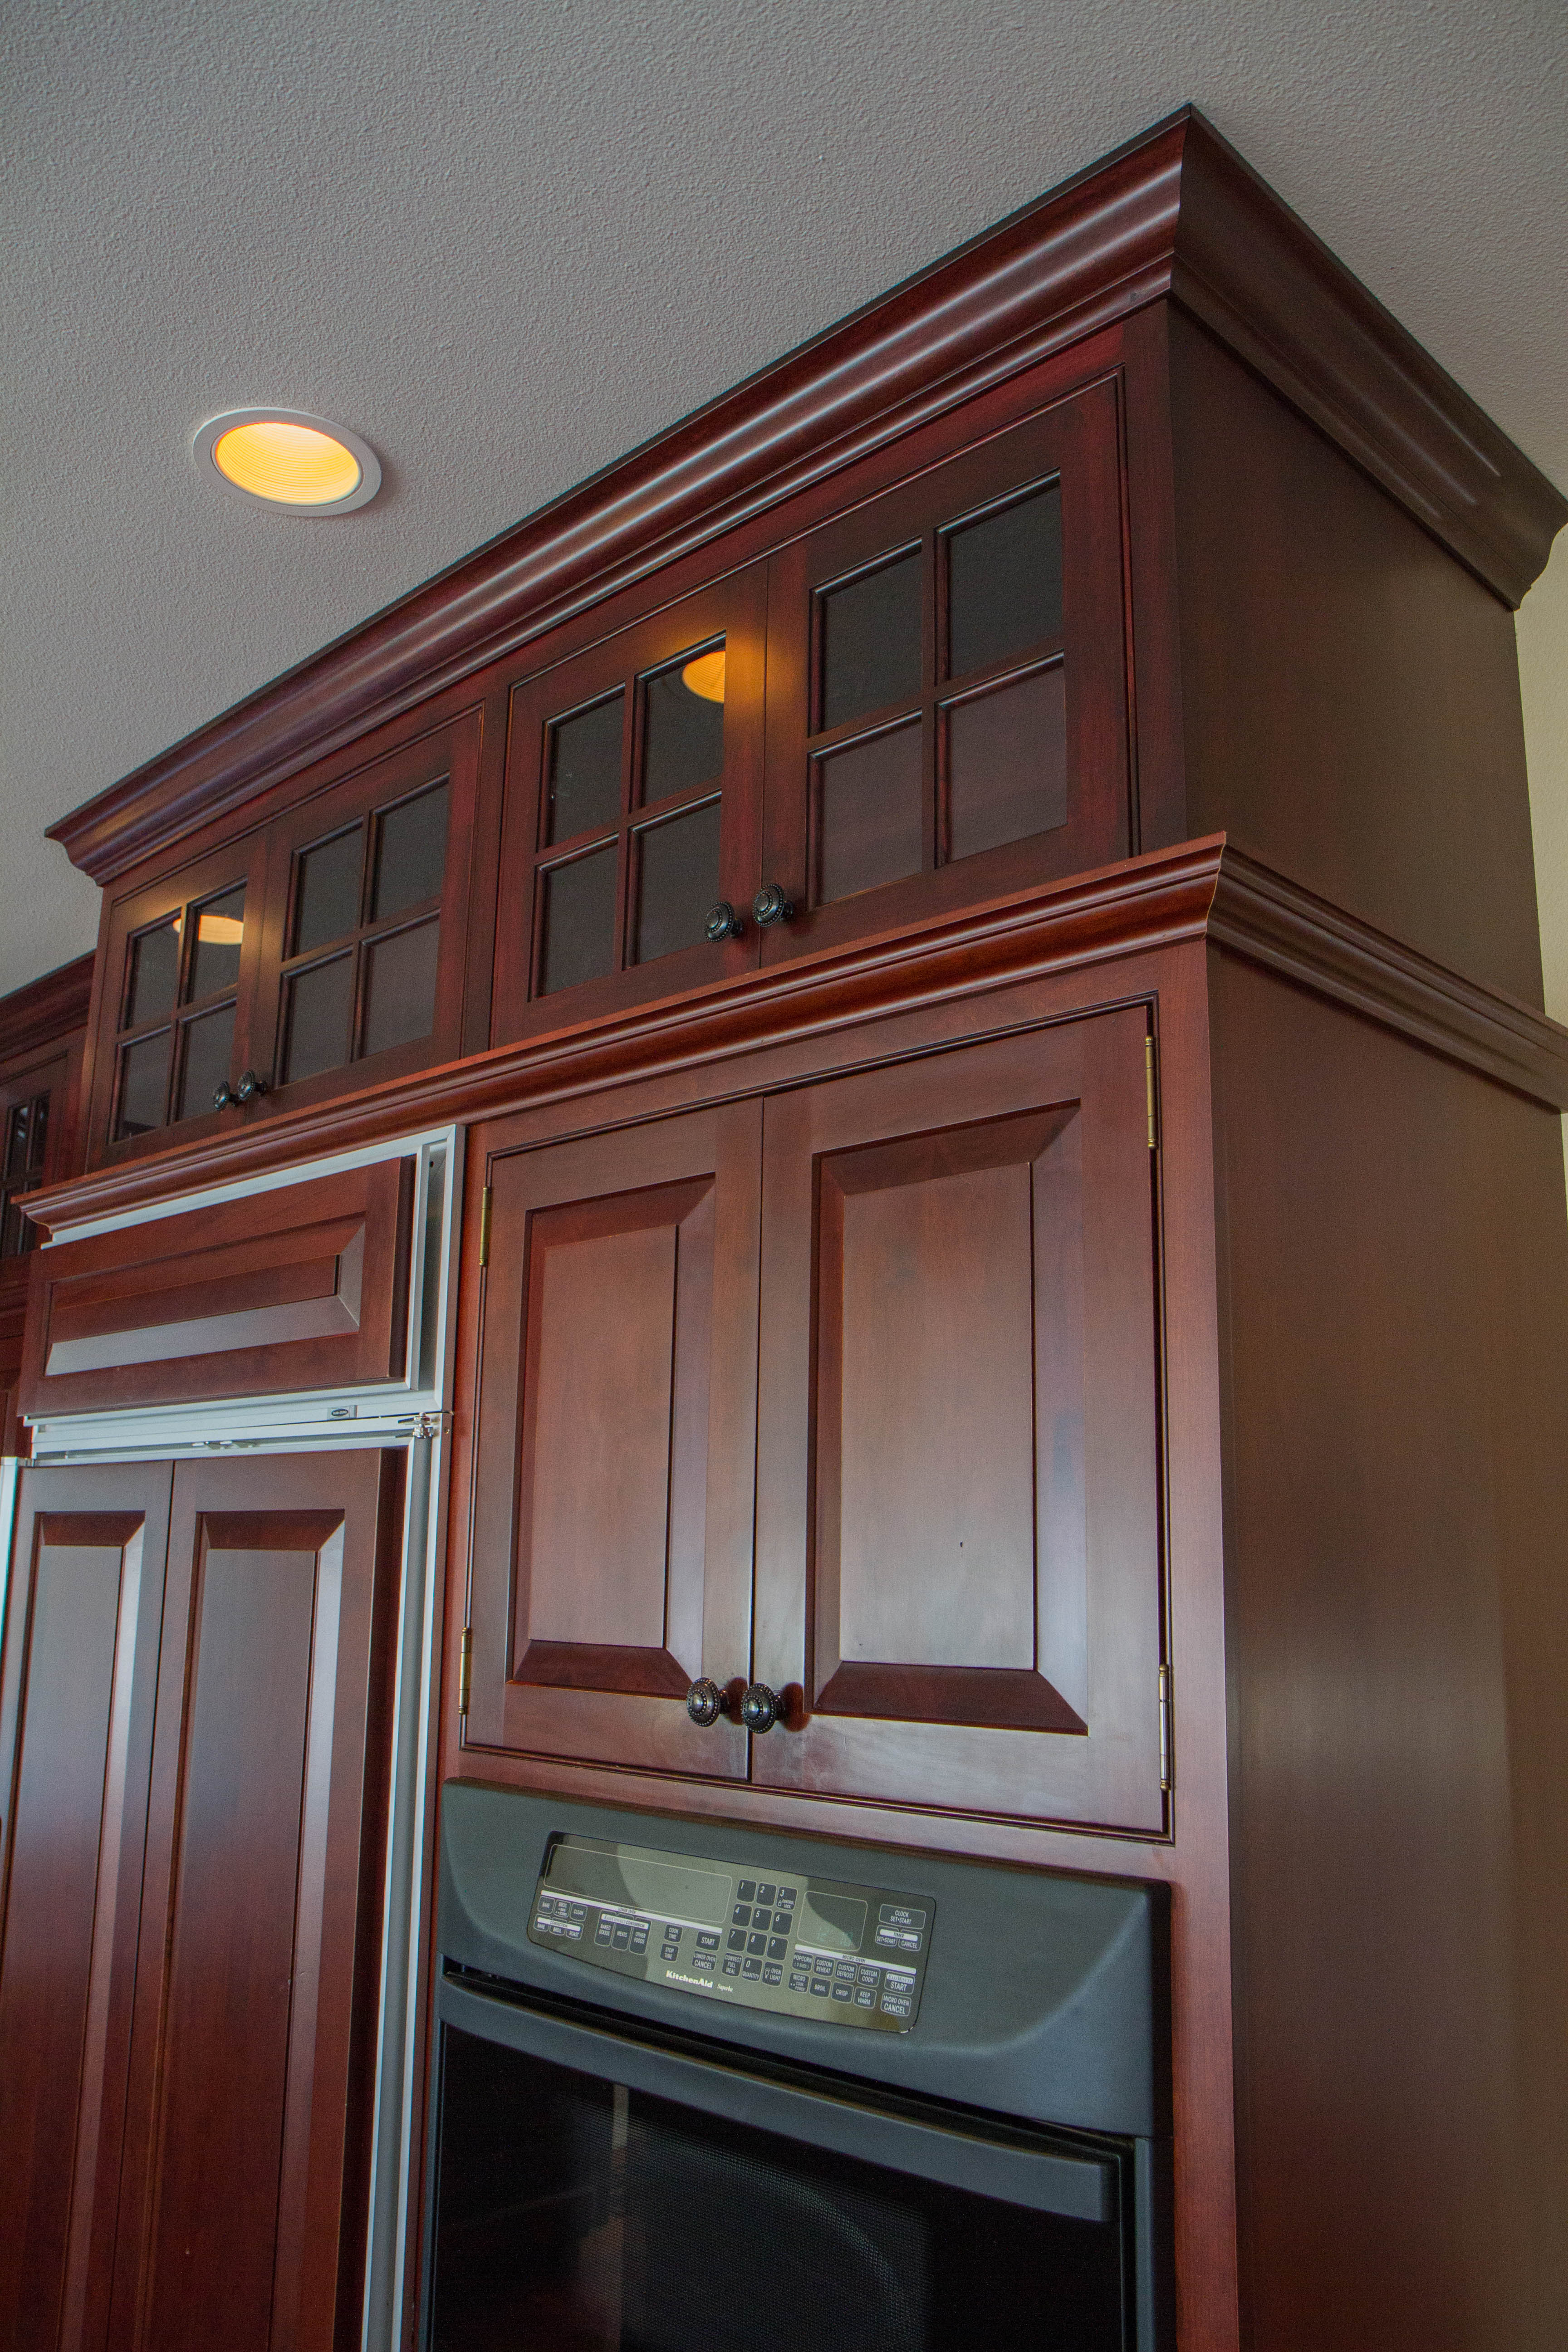 Creative Custom Cabinets | Matching Existing Cabinets